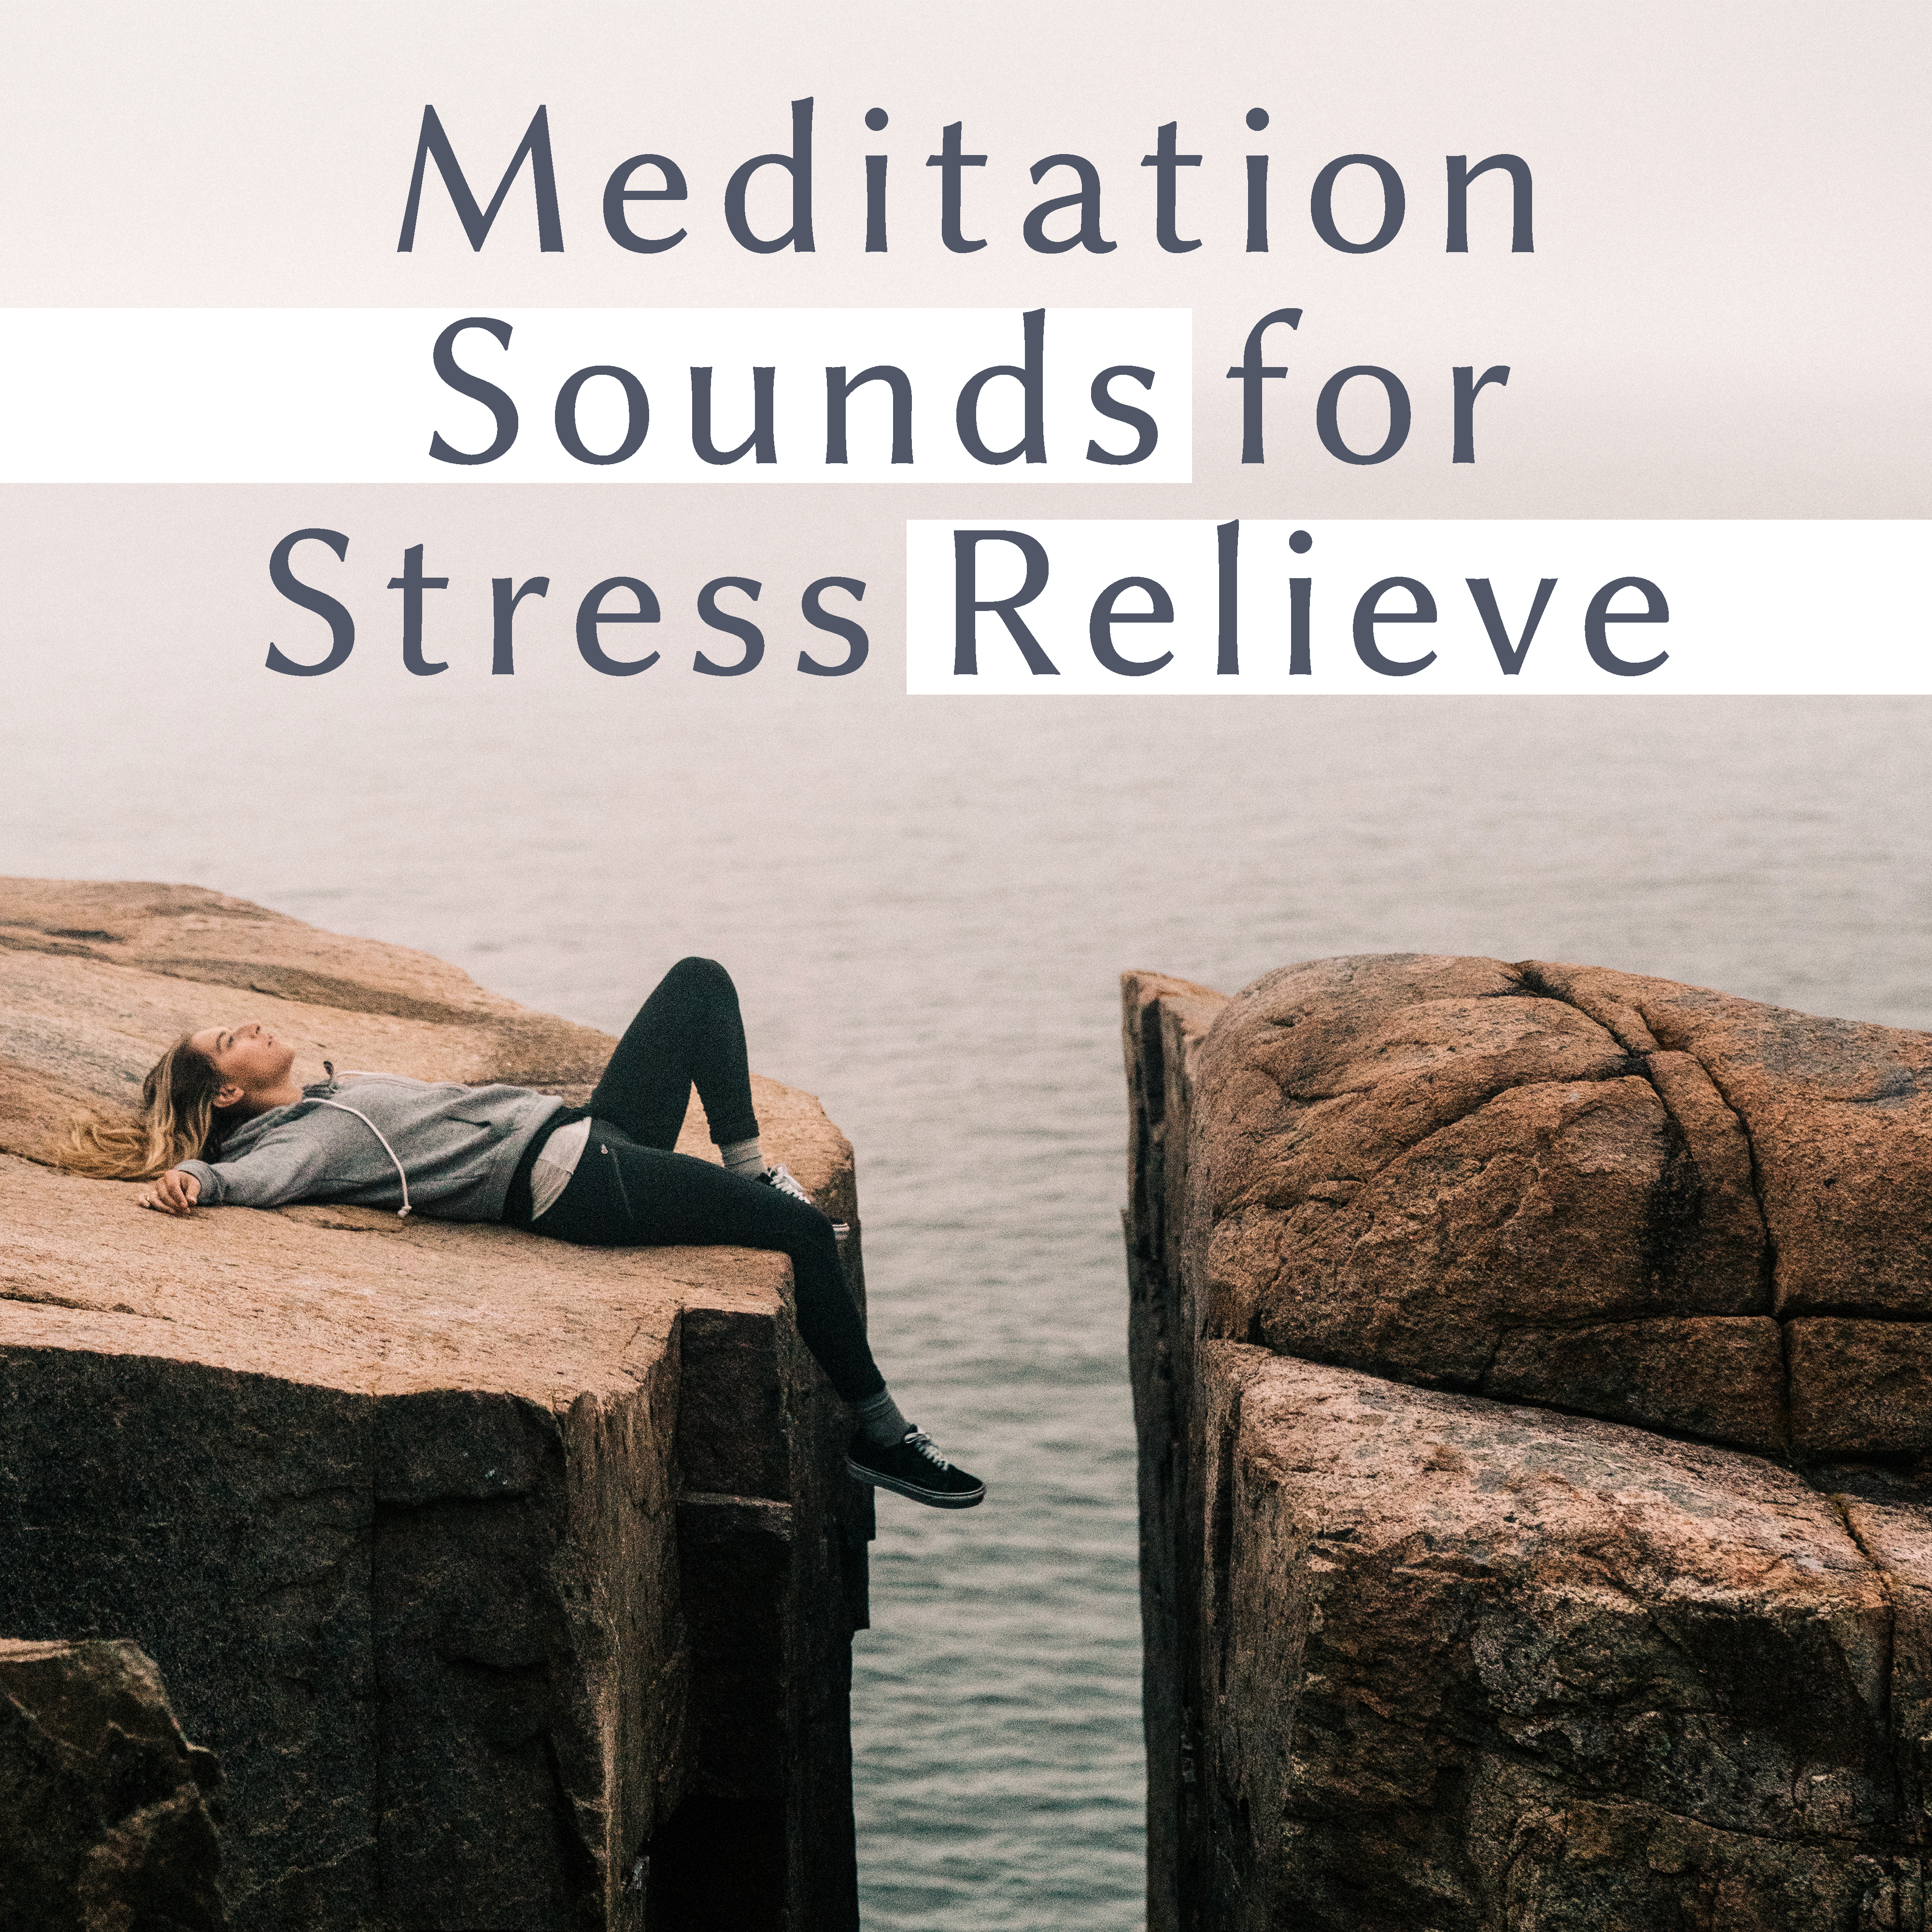 Meditation Sounds for Stress Relieve  Calm Music to Relax, Healing Therapy, Buddha Lounge, Stress Relief